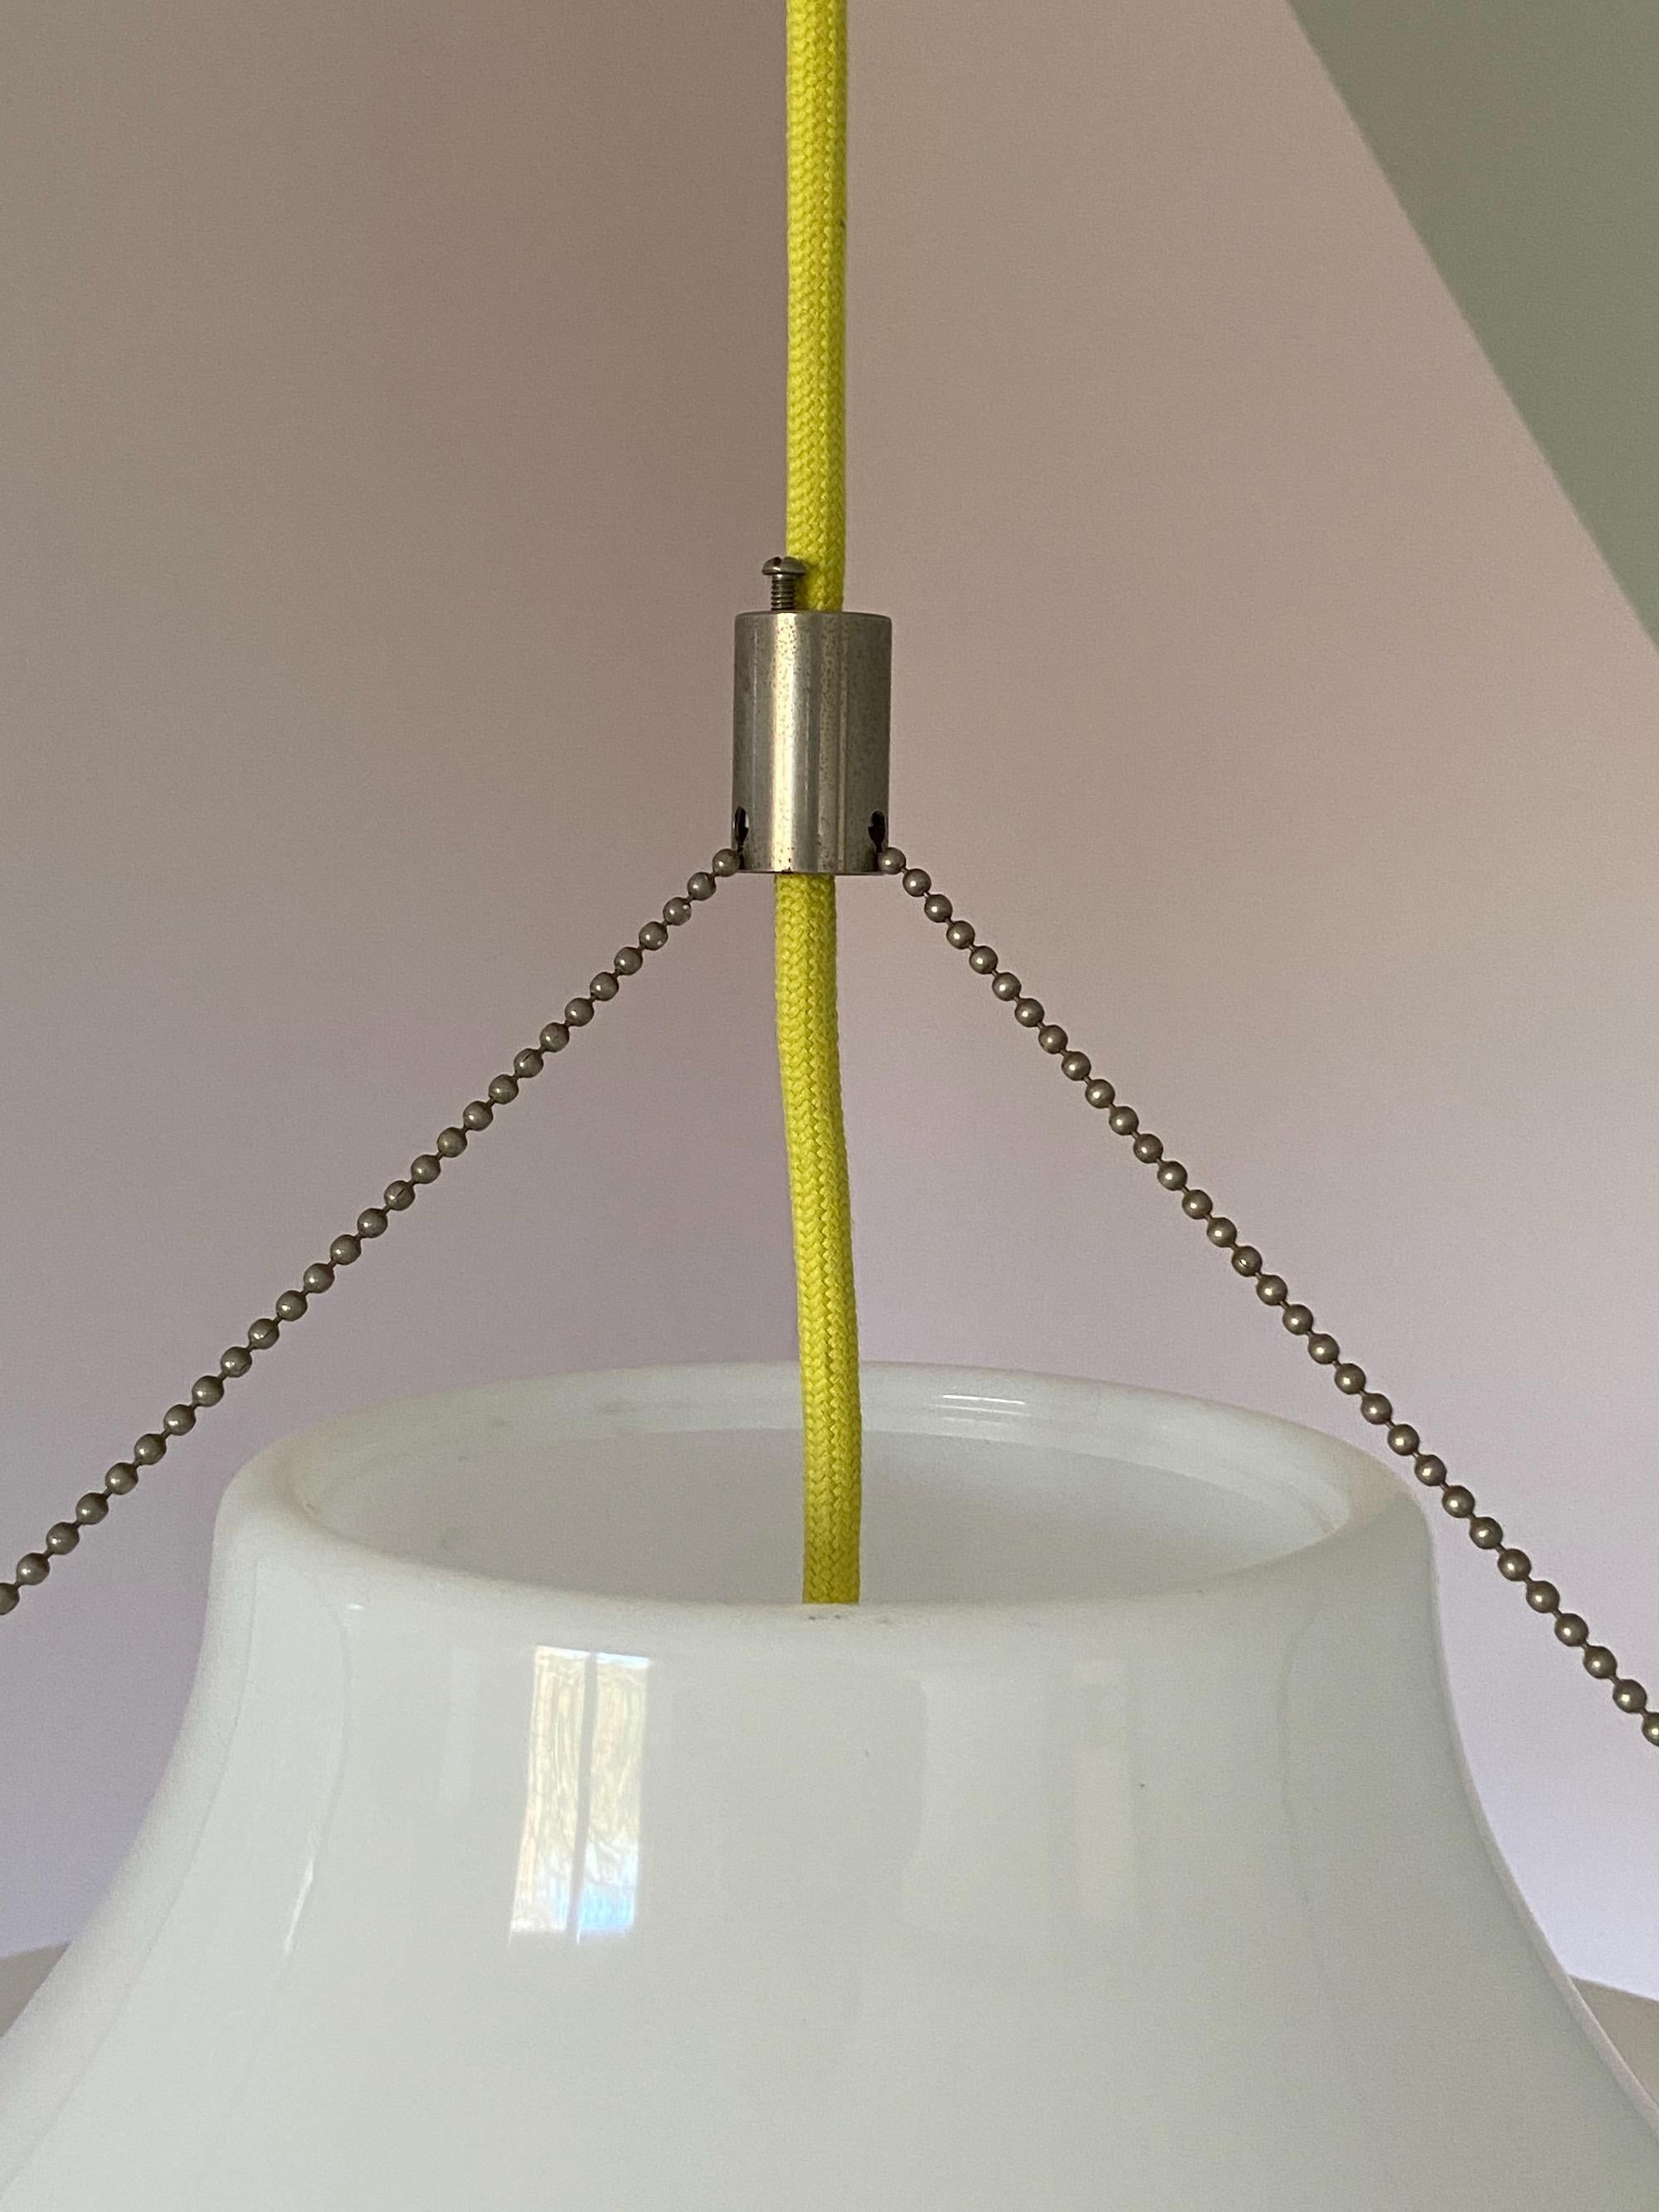 Ceiling lamp ‘Sky Flyer’ designed by Yki Nummi, Made in Finland. 1960s.
Acrylic and steel, adjustable height. No damages with yellow fabric cord and E26/27 Edison socket. Ready to use.